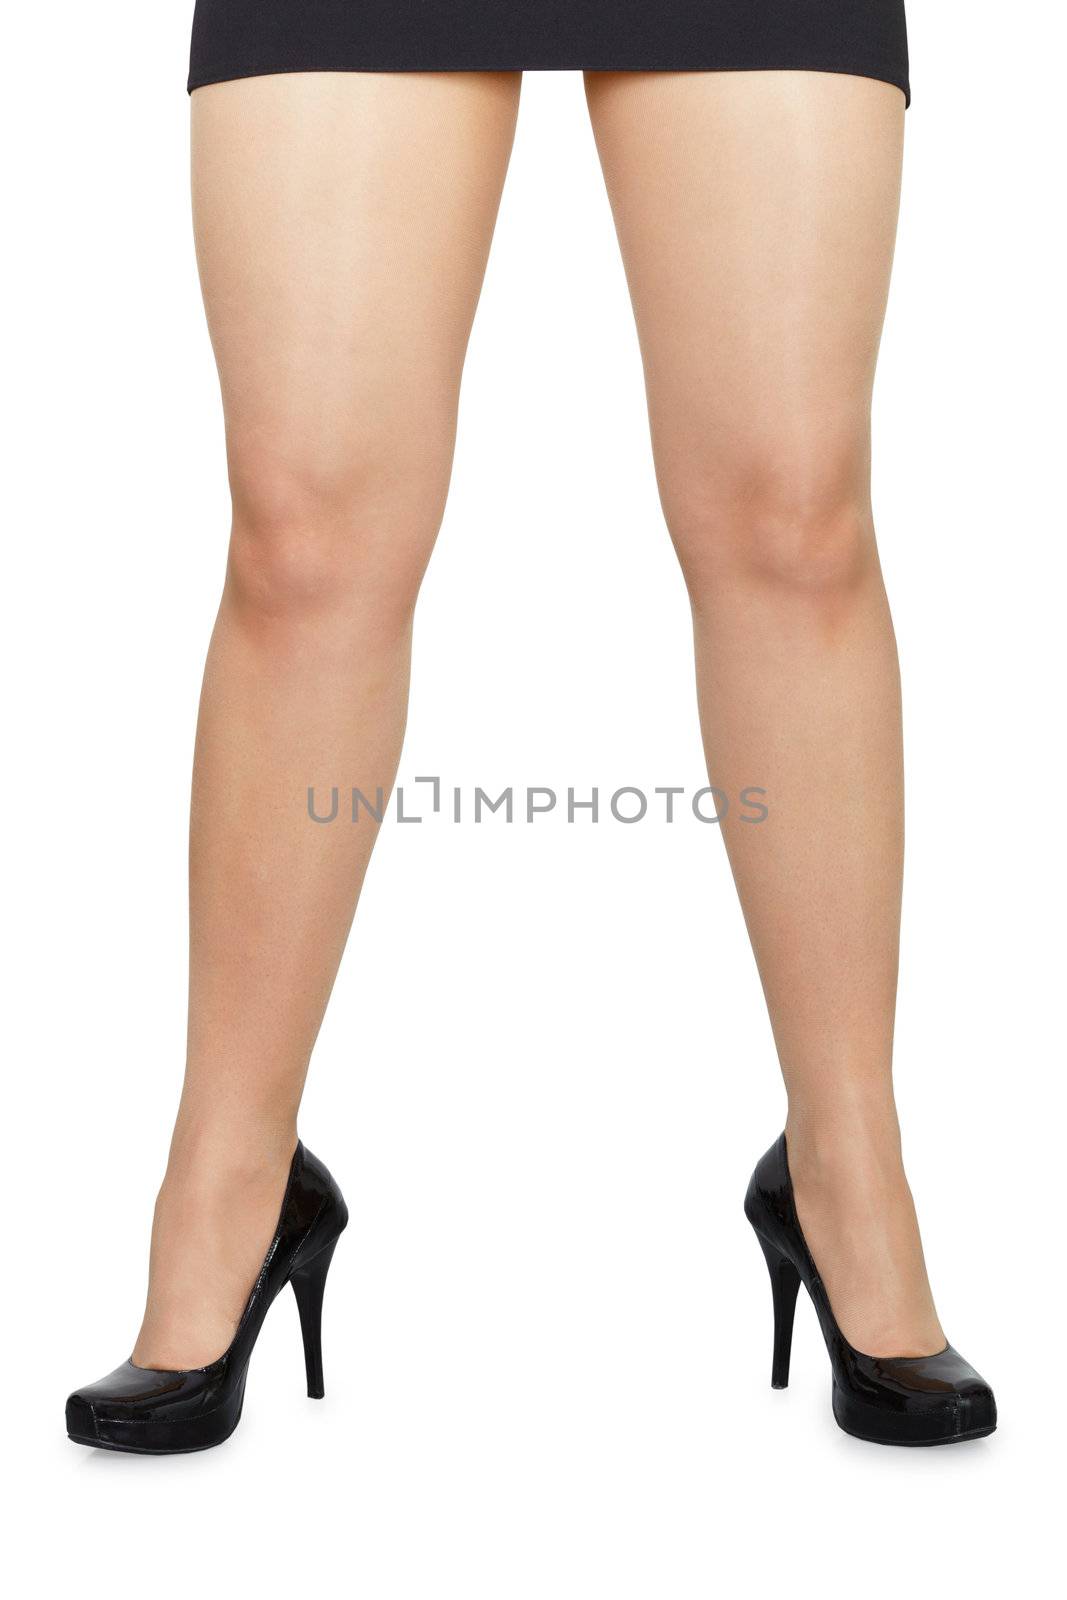 Widely spaced female legs on white background